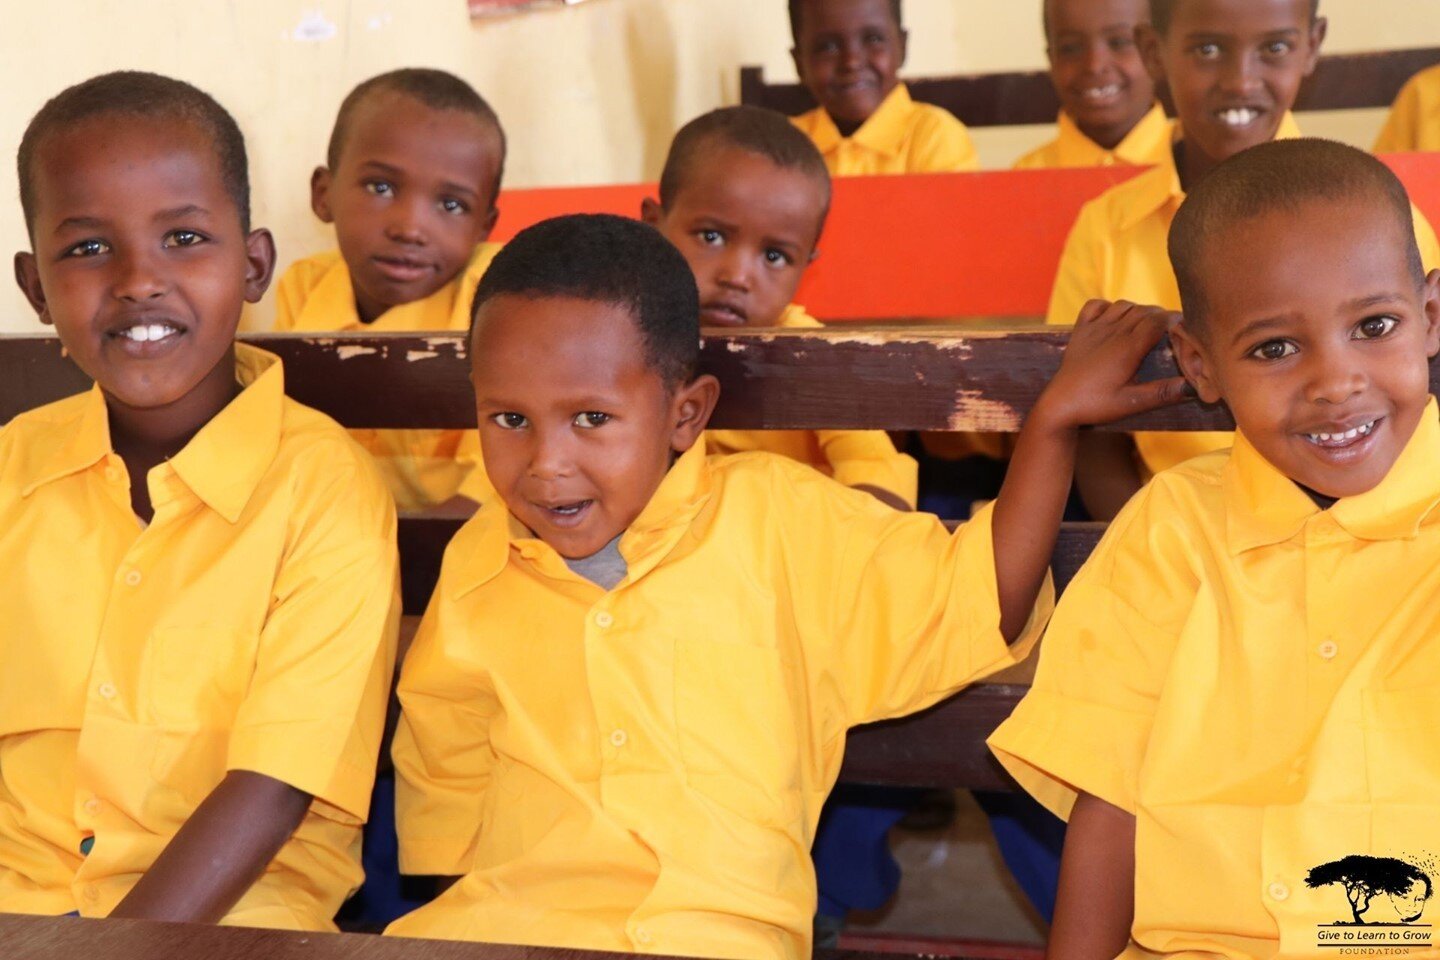 We are proud of our young students for always showing up to learn with a smile. You make our day!⁠
⁠
*We are a #nonprofit organization dedicated to providing free education to underprivileged children in #Eastafrica.⁠ If you would like to know more o